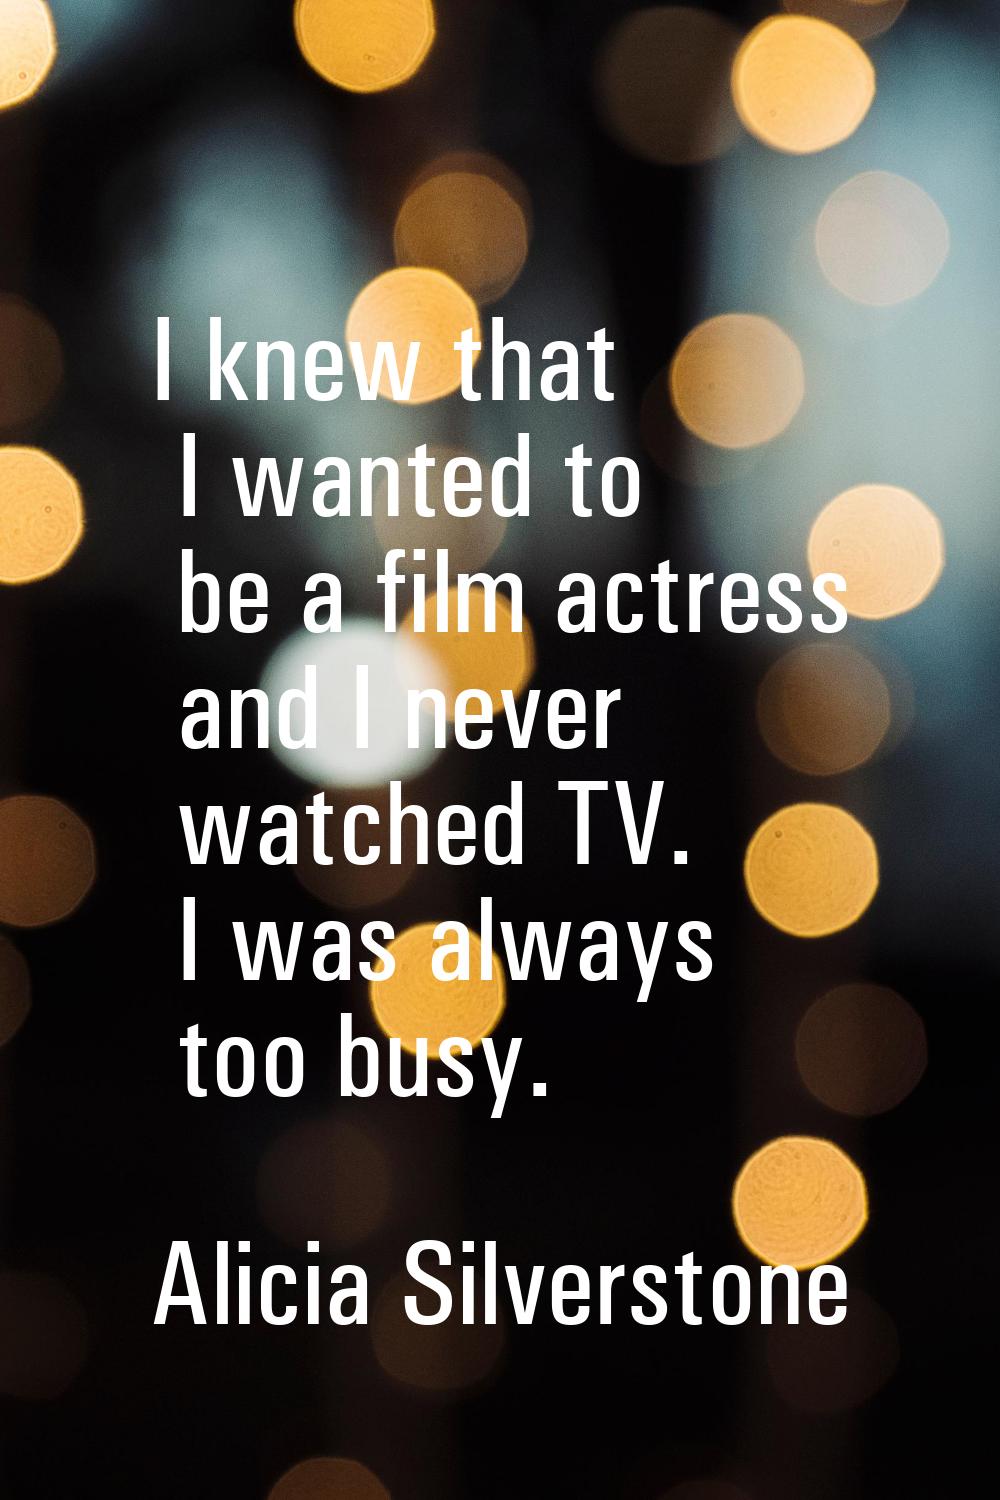 I knew that I wanted to be a film actress and I never watched TV. I was always too busy.